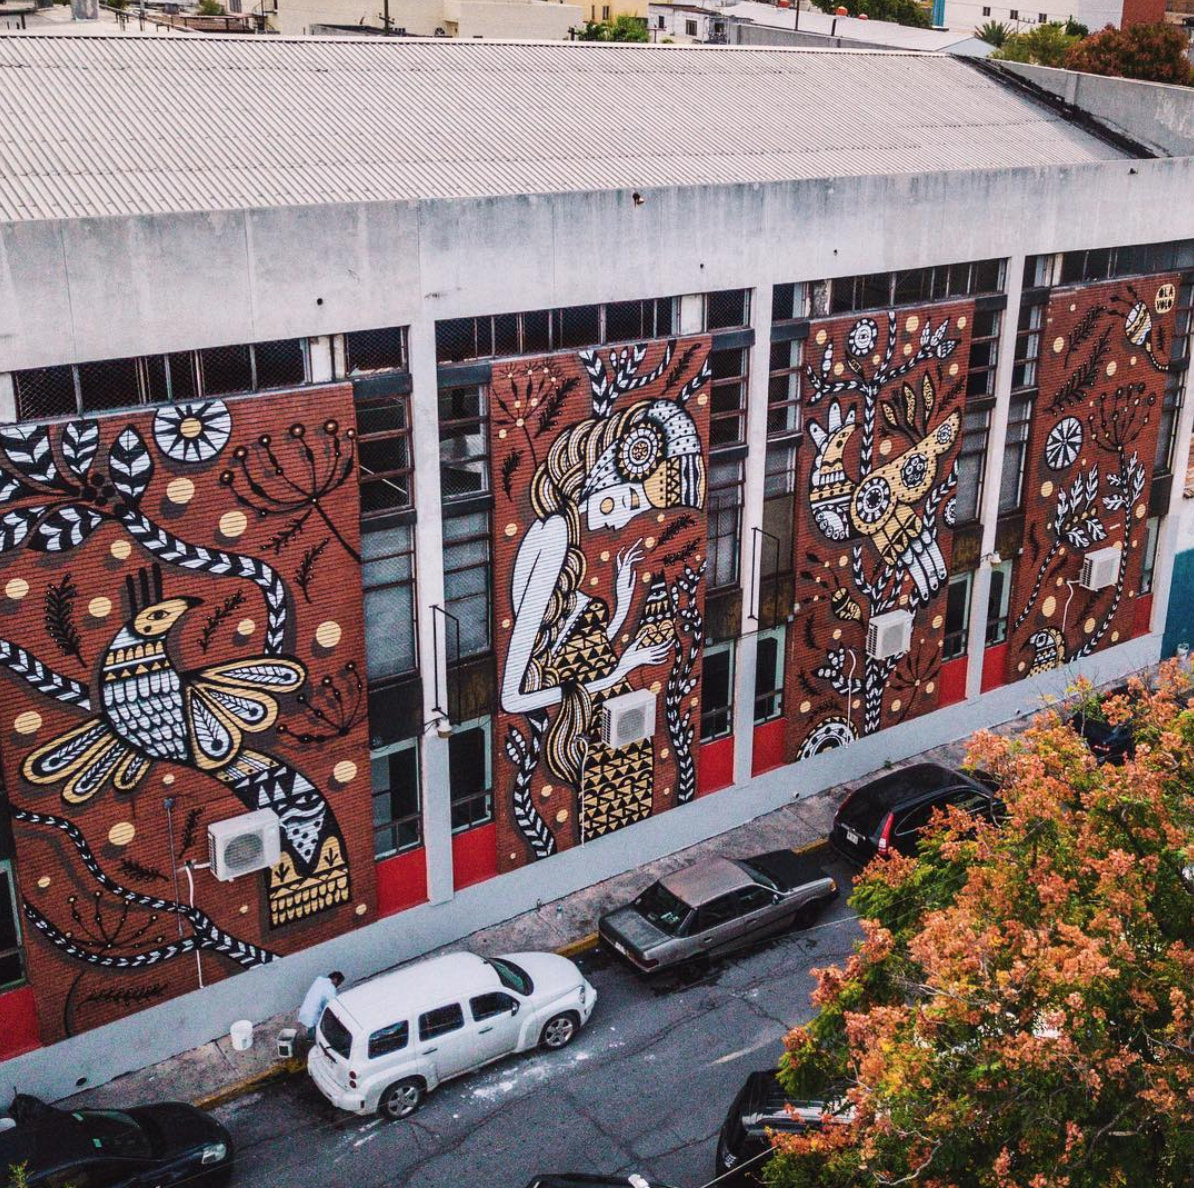 Vancouver muralist Ola Volo gets dream collaboration gig with